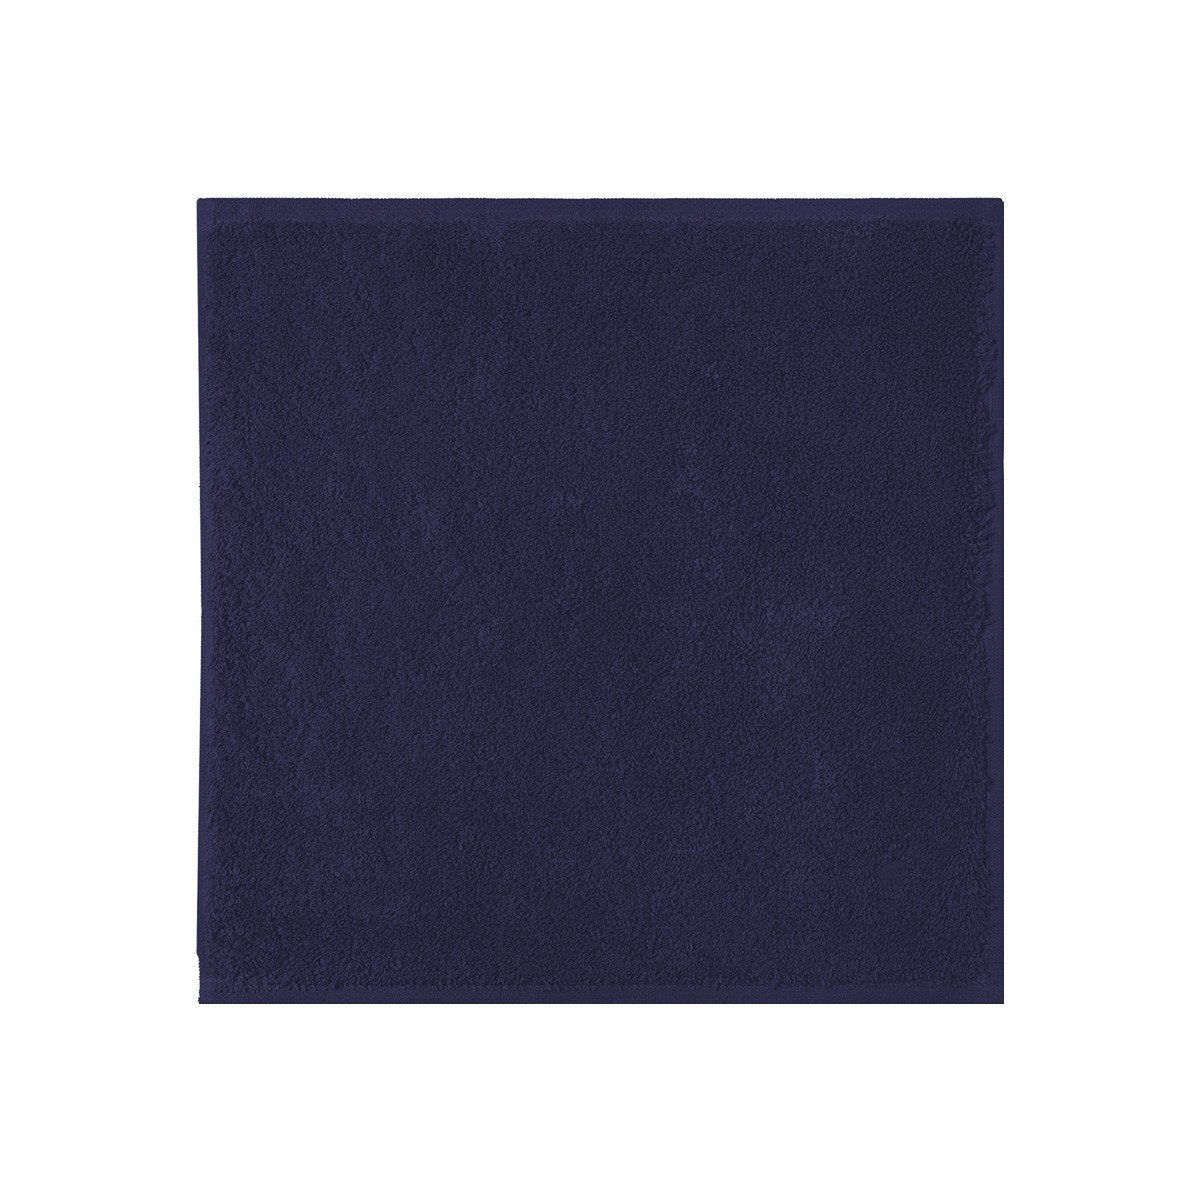 Fig Linens - Yves Delorme Etoile Marine - Navy Blue Wash Cloth